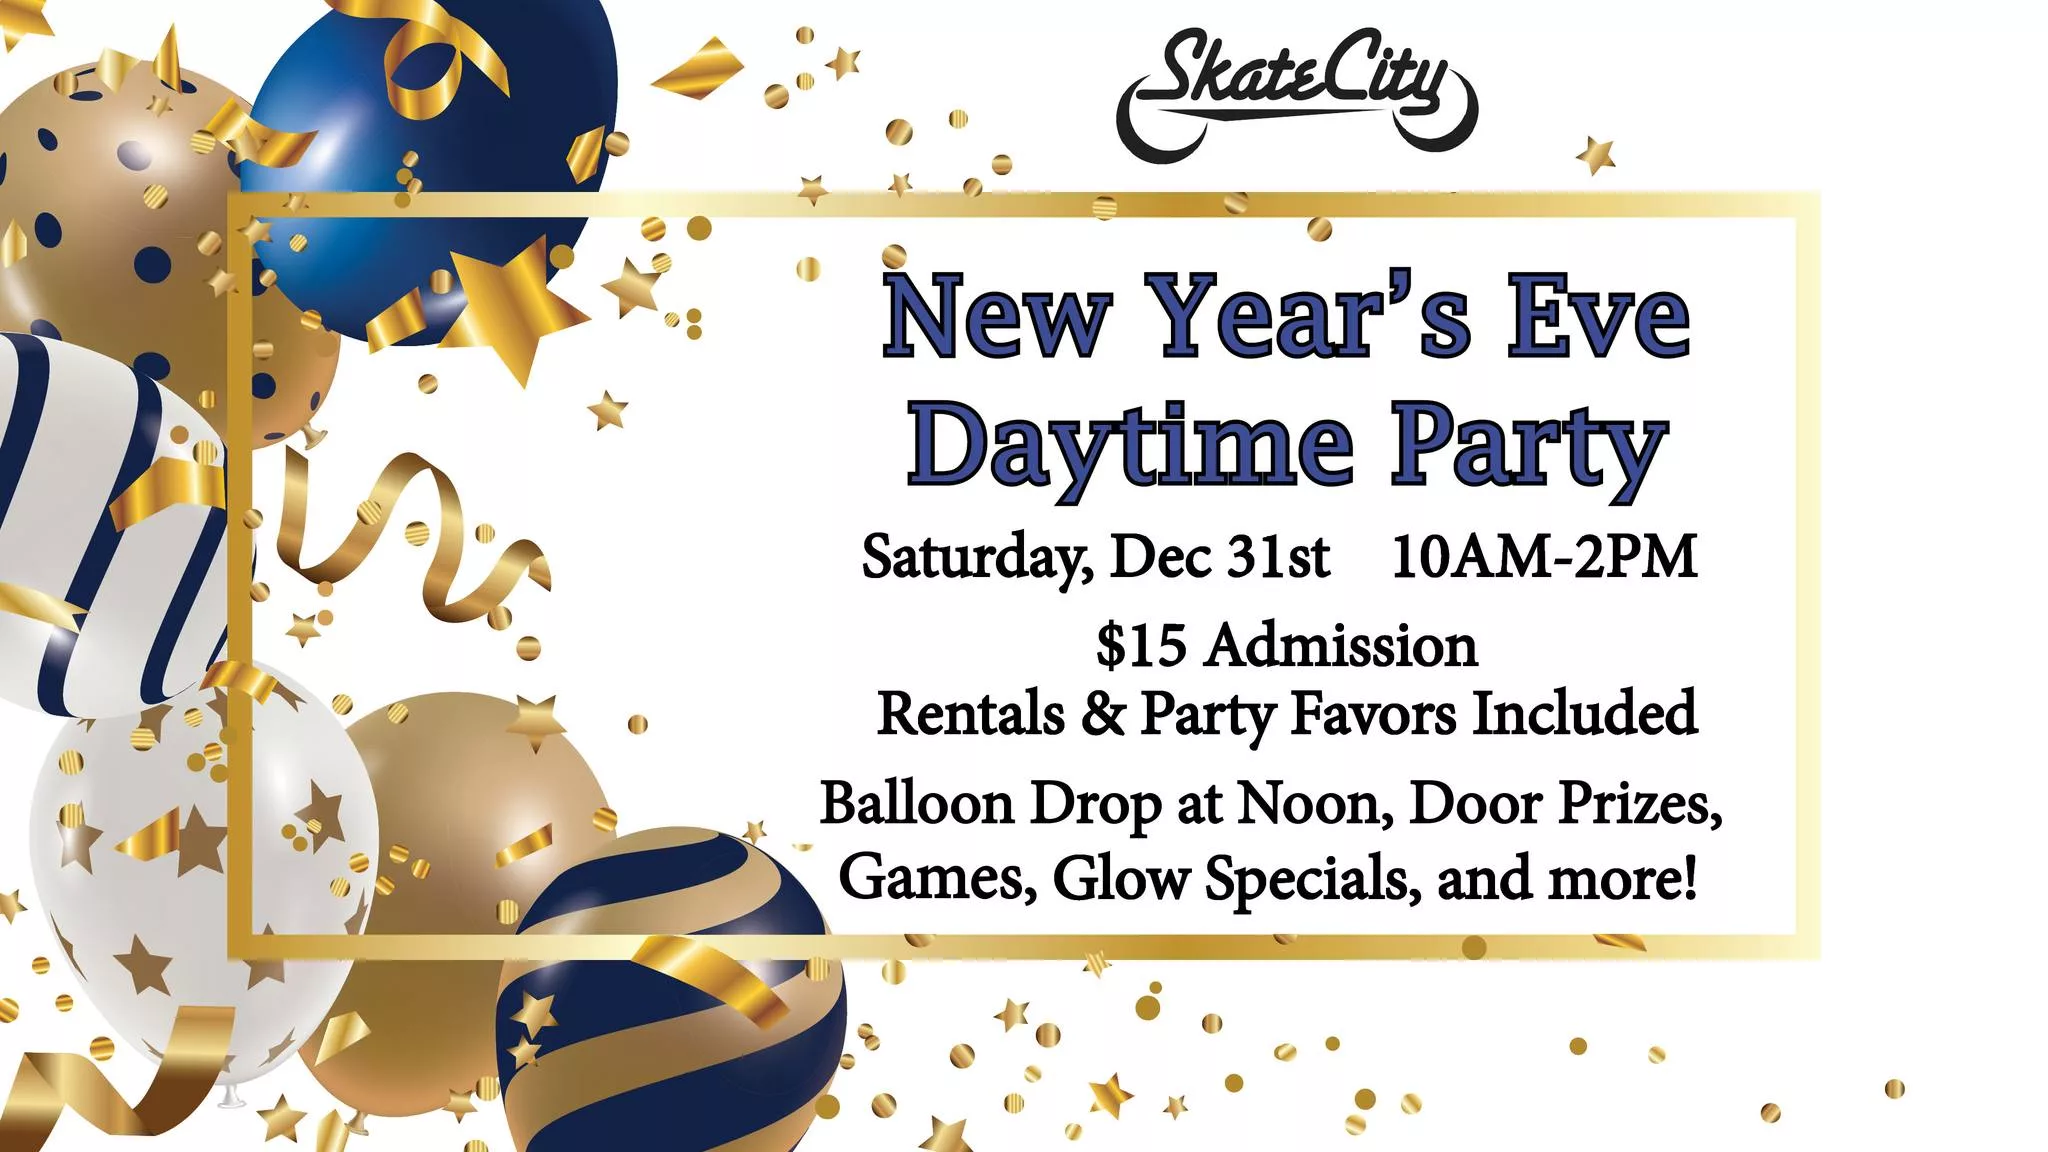 New Year's Eve Daytime Party